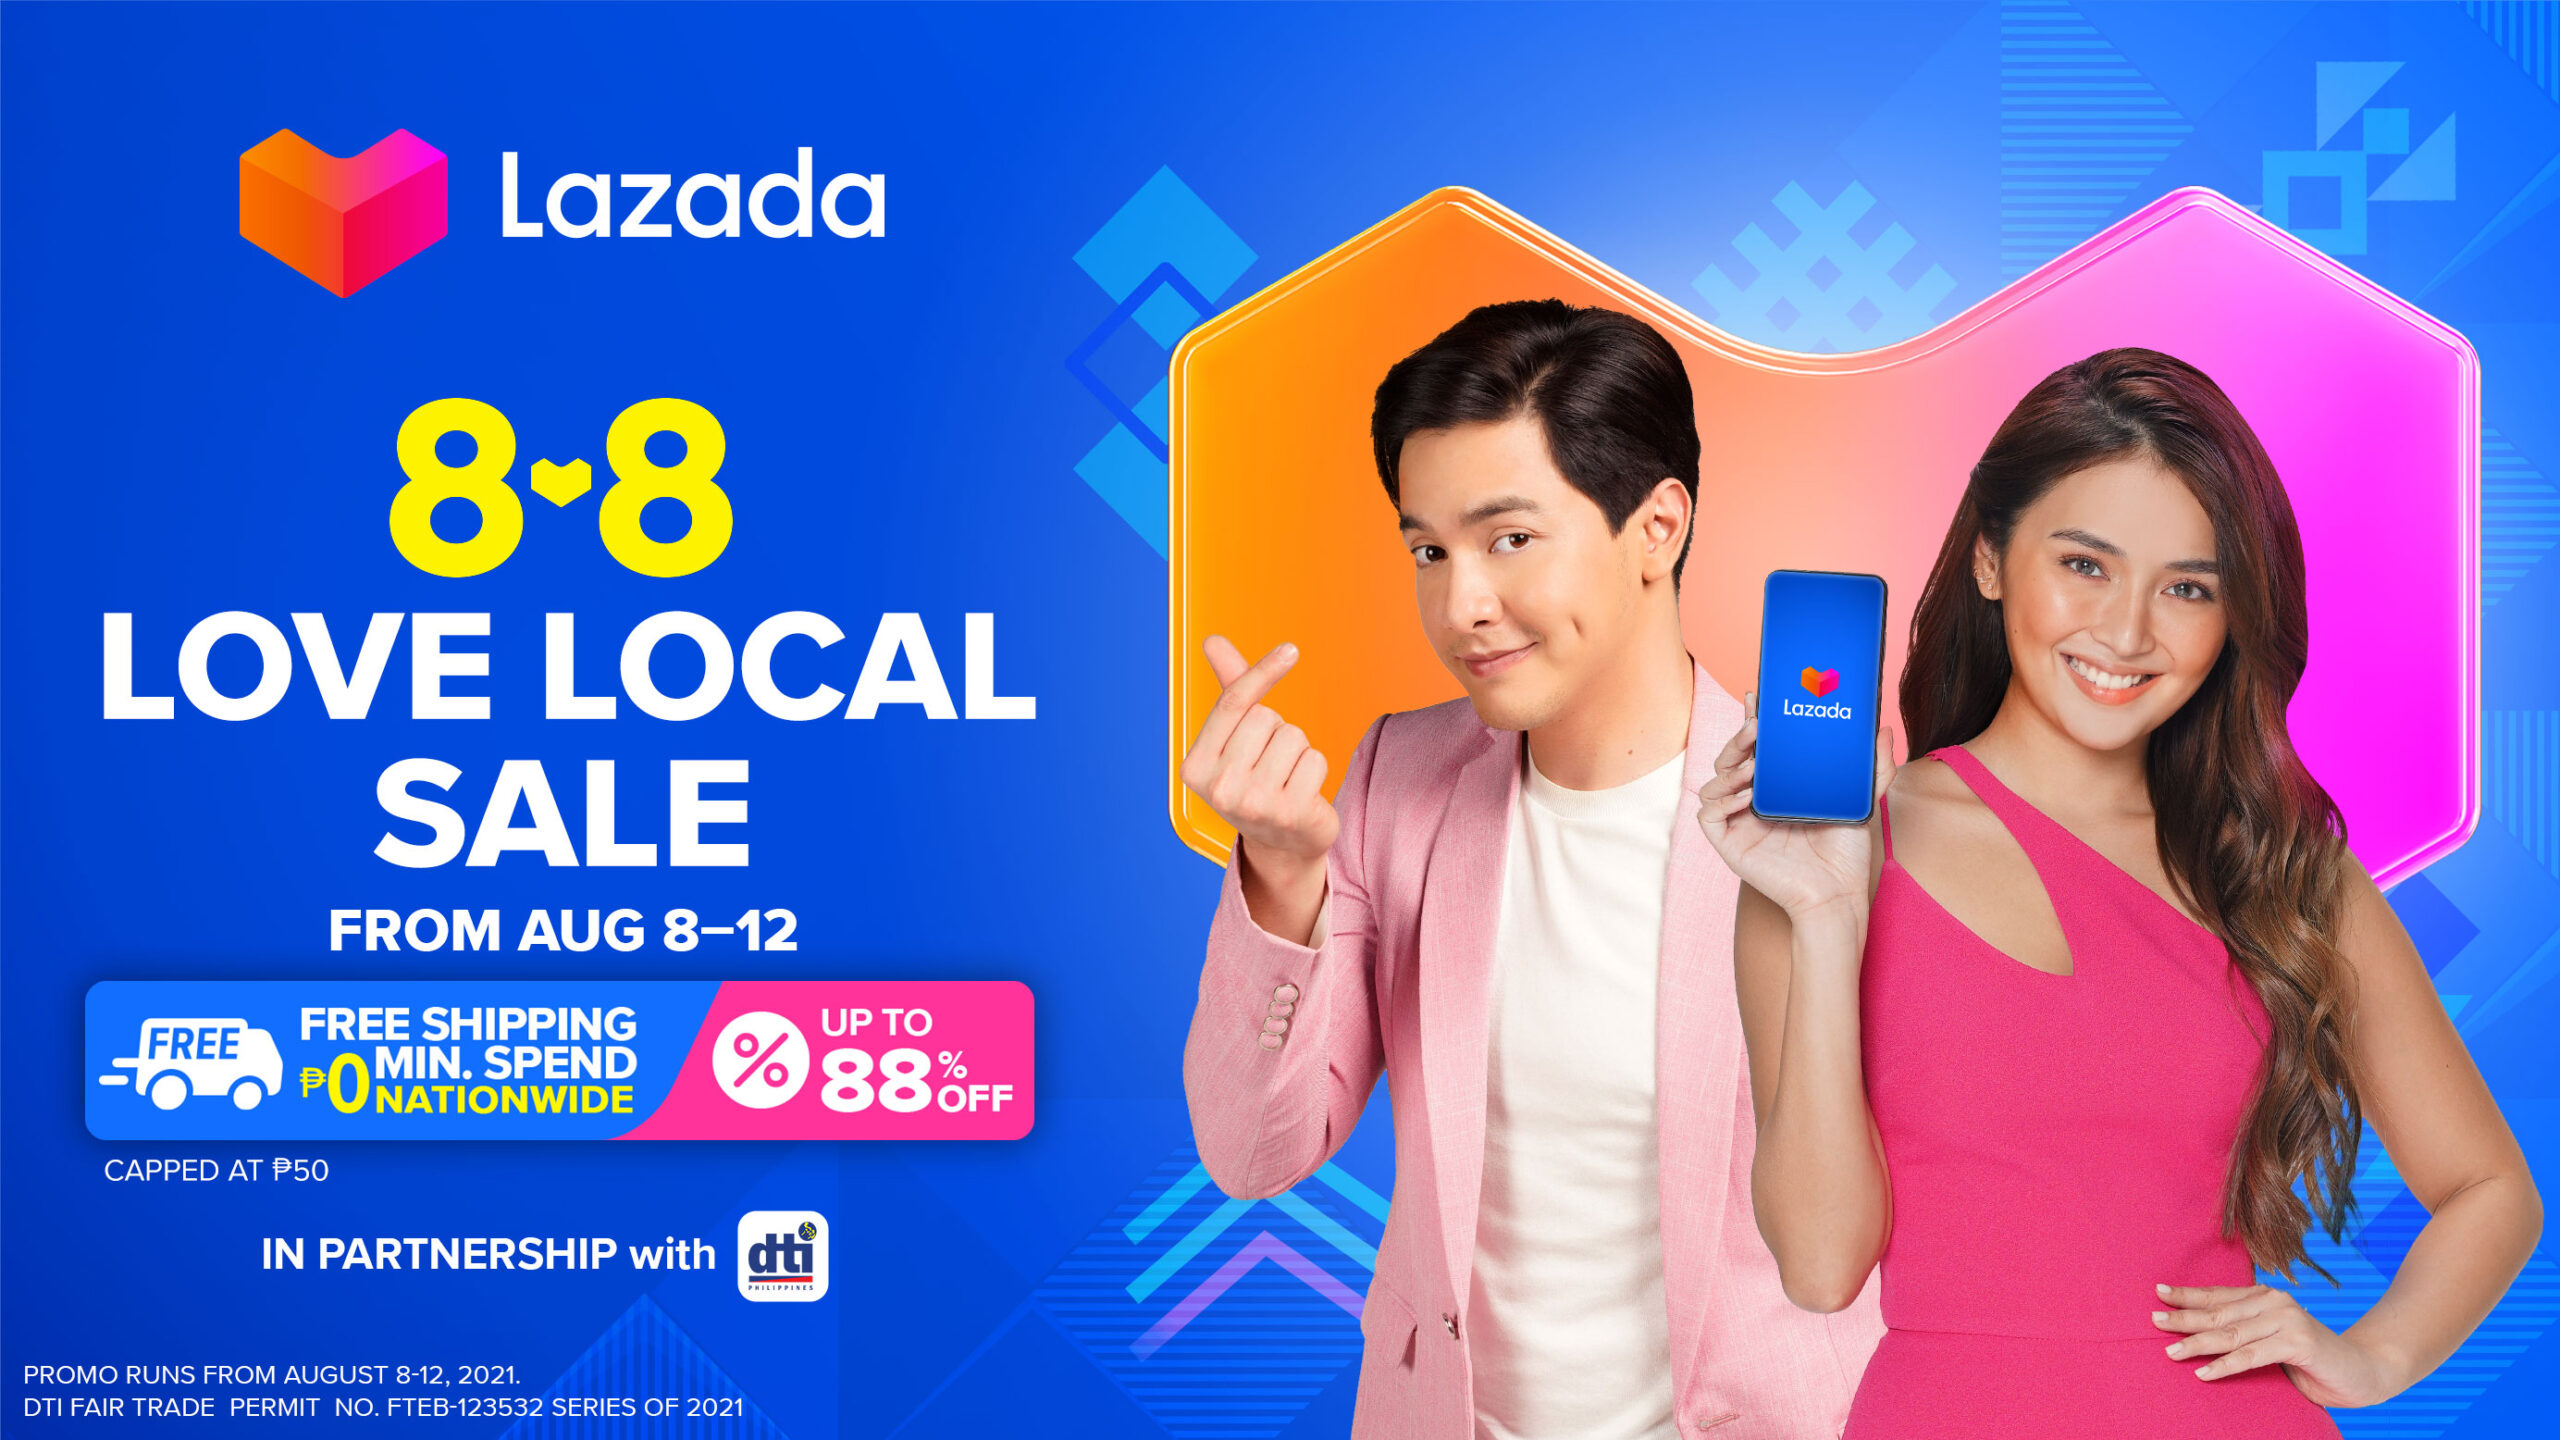 Lazada and DTI join forces in five-day 8.8 Love Local Sale